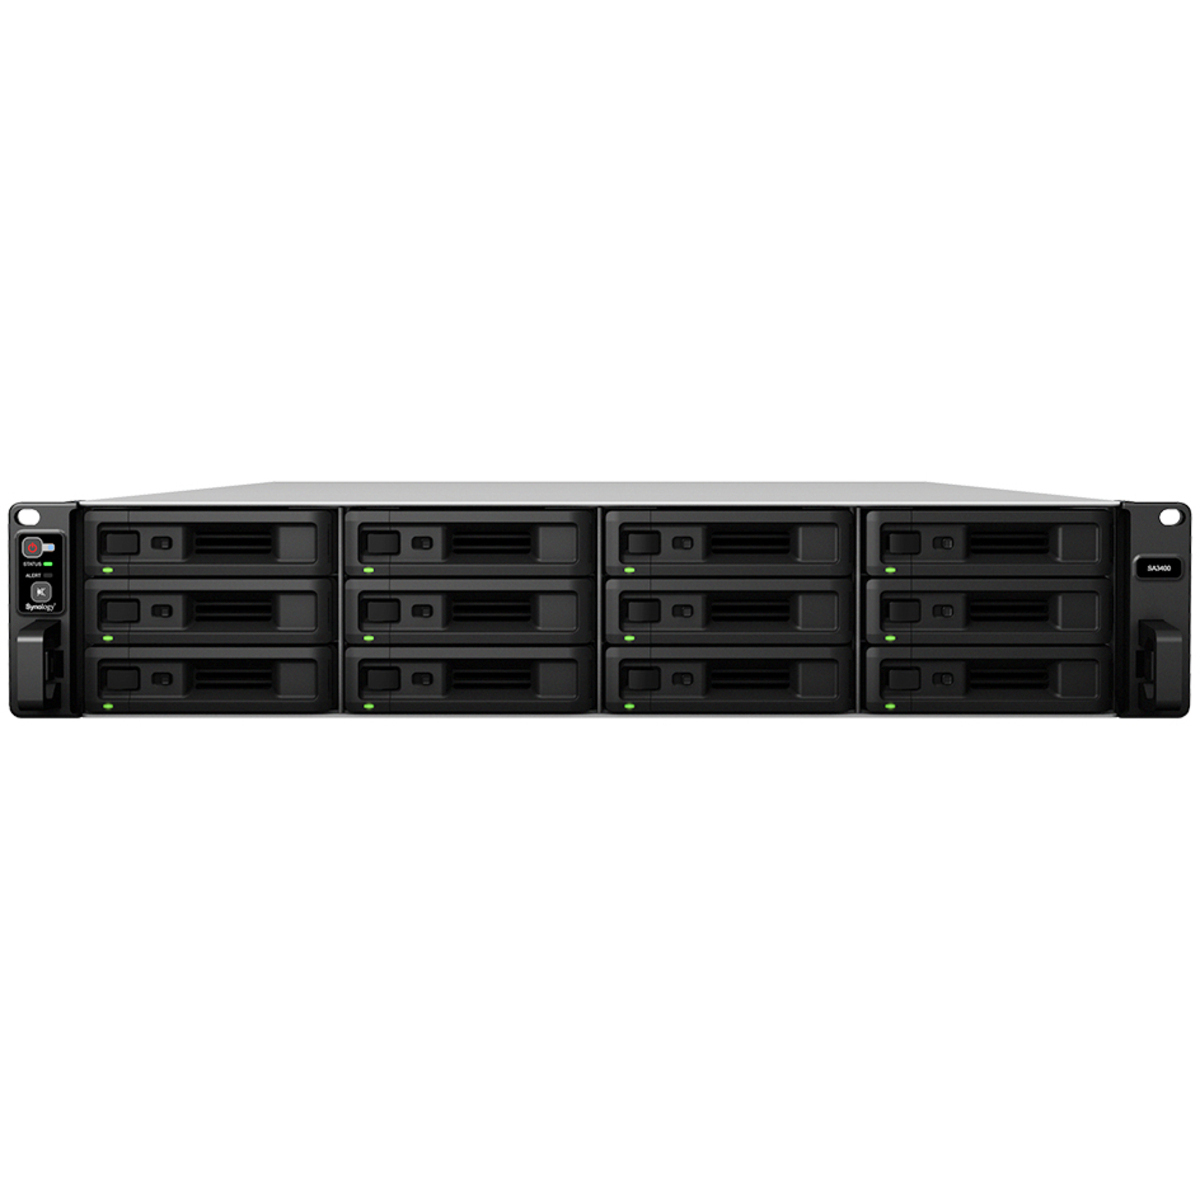 buy $8741 Synology RackStation SA3400 12tb RackMount NAS - Network Attached Storage Device 12x1000gb Samsung 870 QVO MZ-77Q1T0 2.5 SATA 6Gb/s SSD CONSUMER Class Drives Installed - Burn-In Tested - nas headquarters buy network attached storage server device das new raid-5 free shipping usa RackStation SA3400